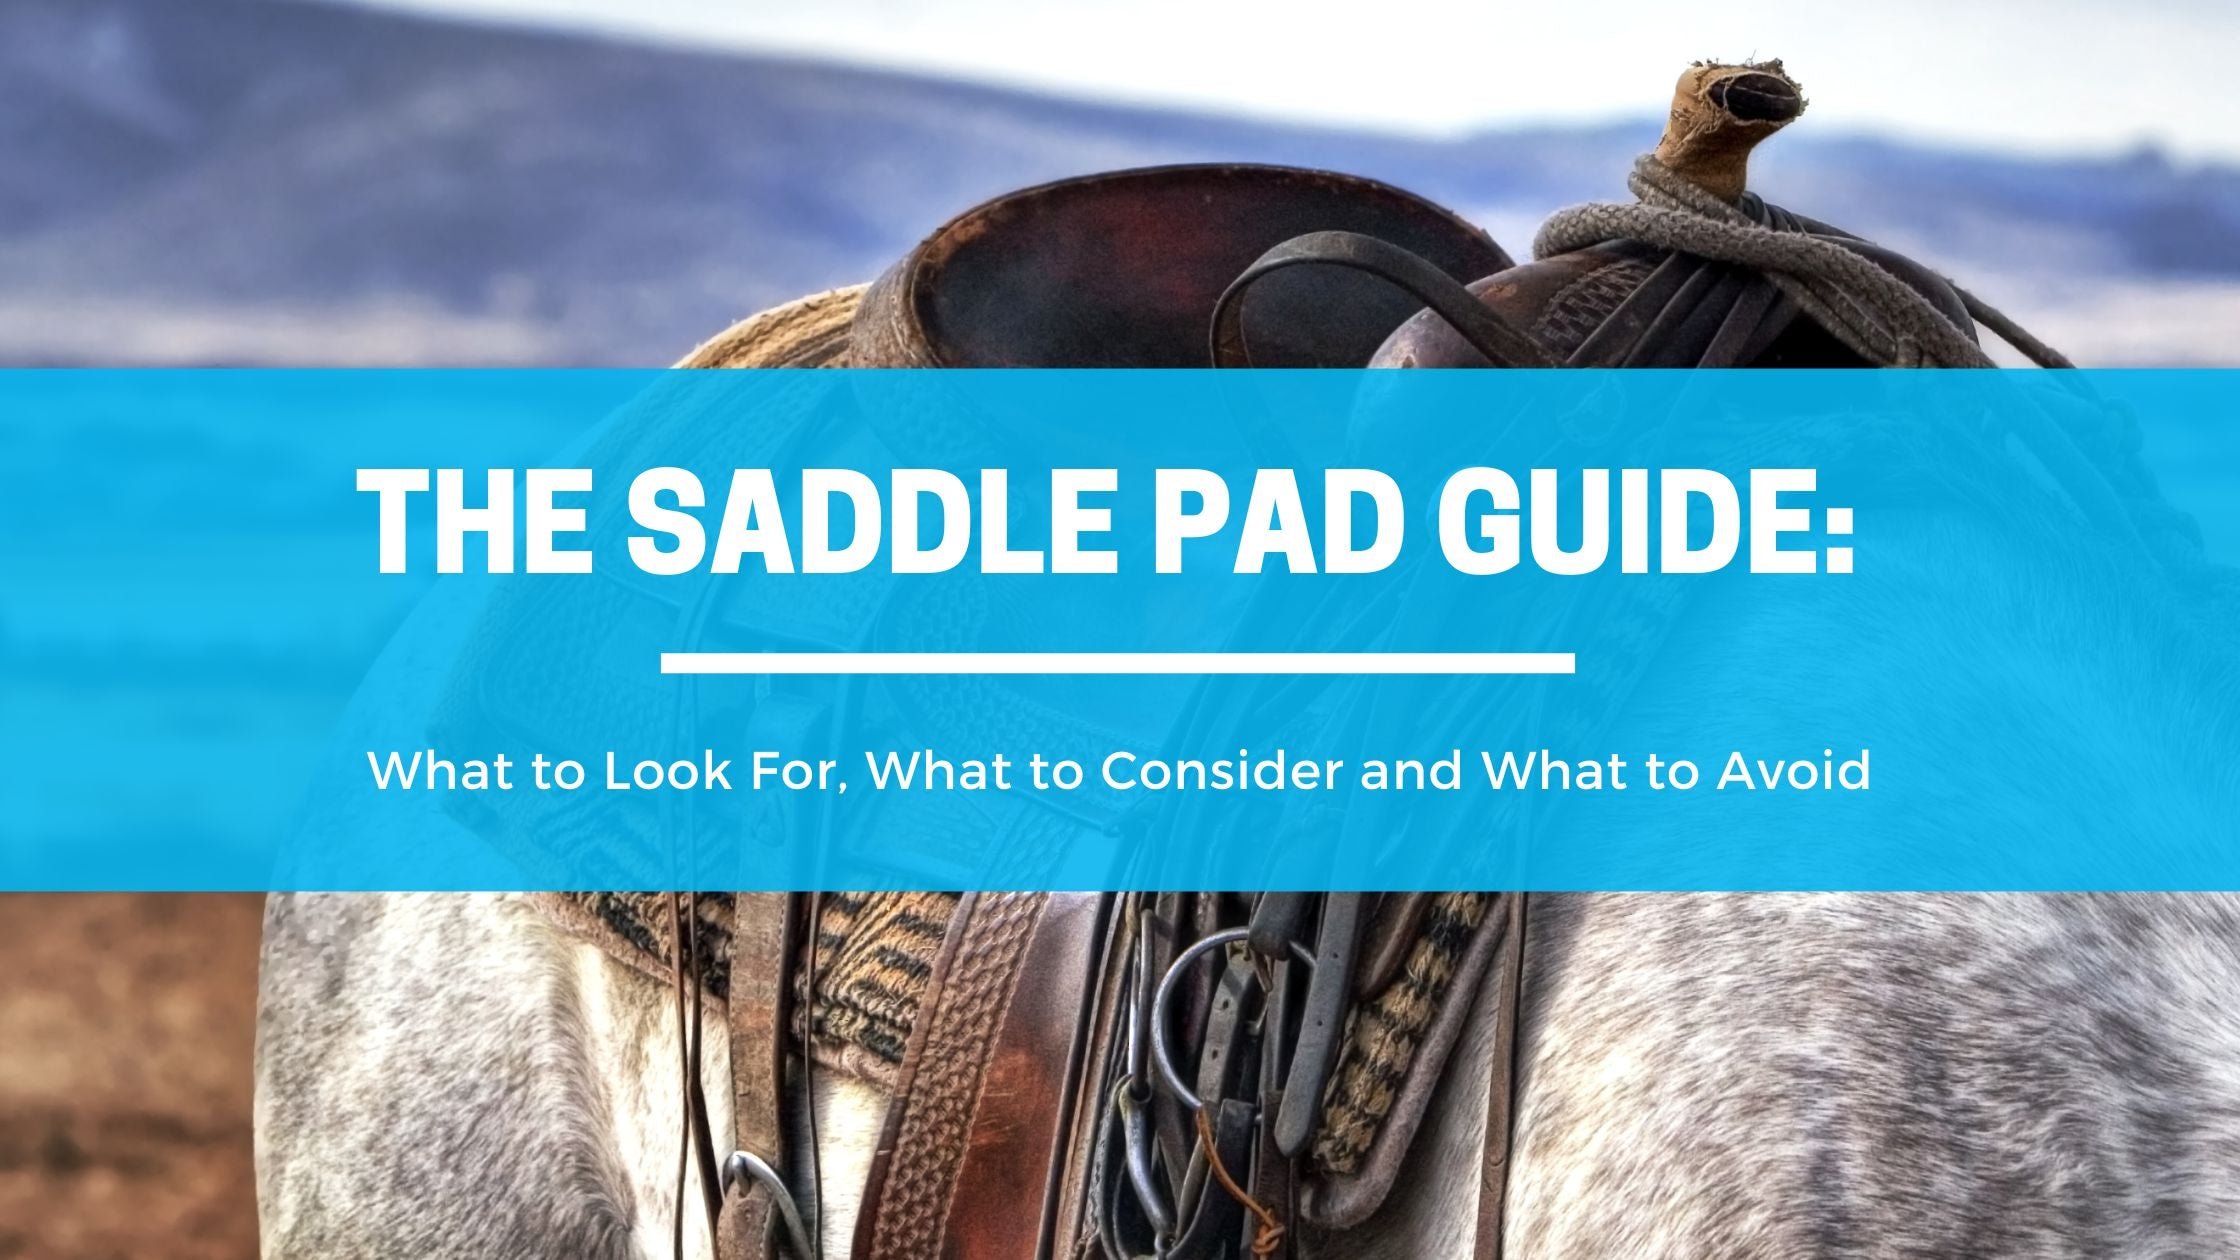 The Saddle Pad Guide: What to Look For, What to Consider and What to Avoid